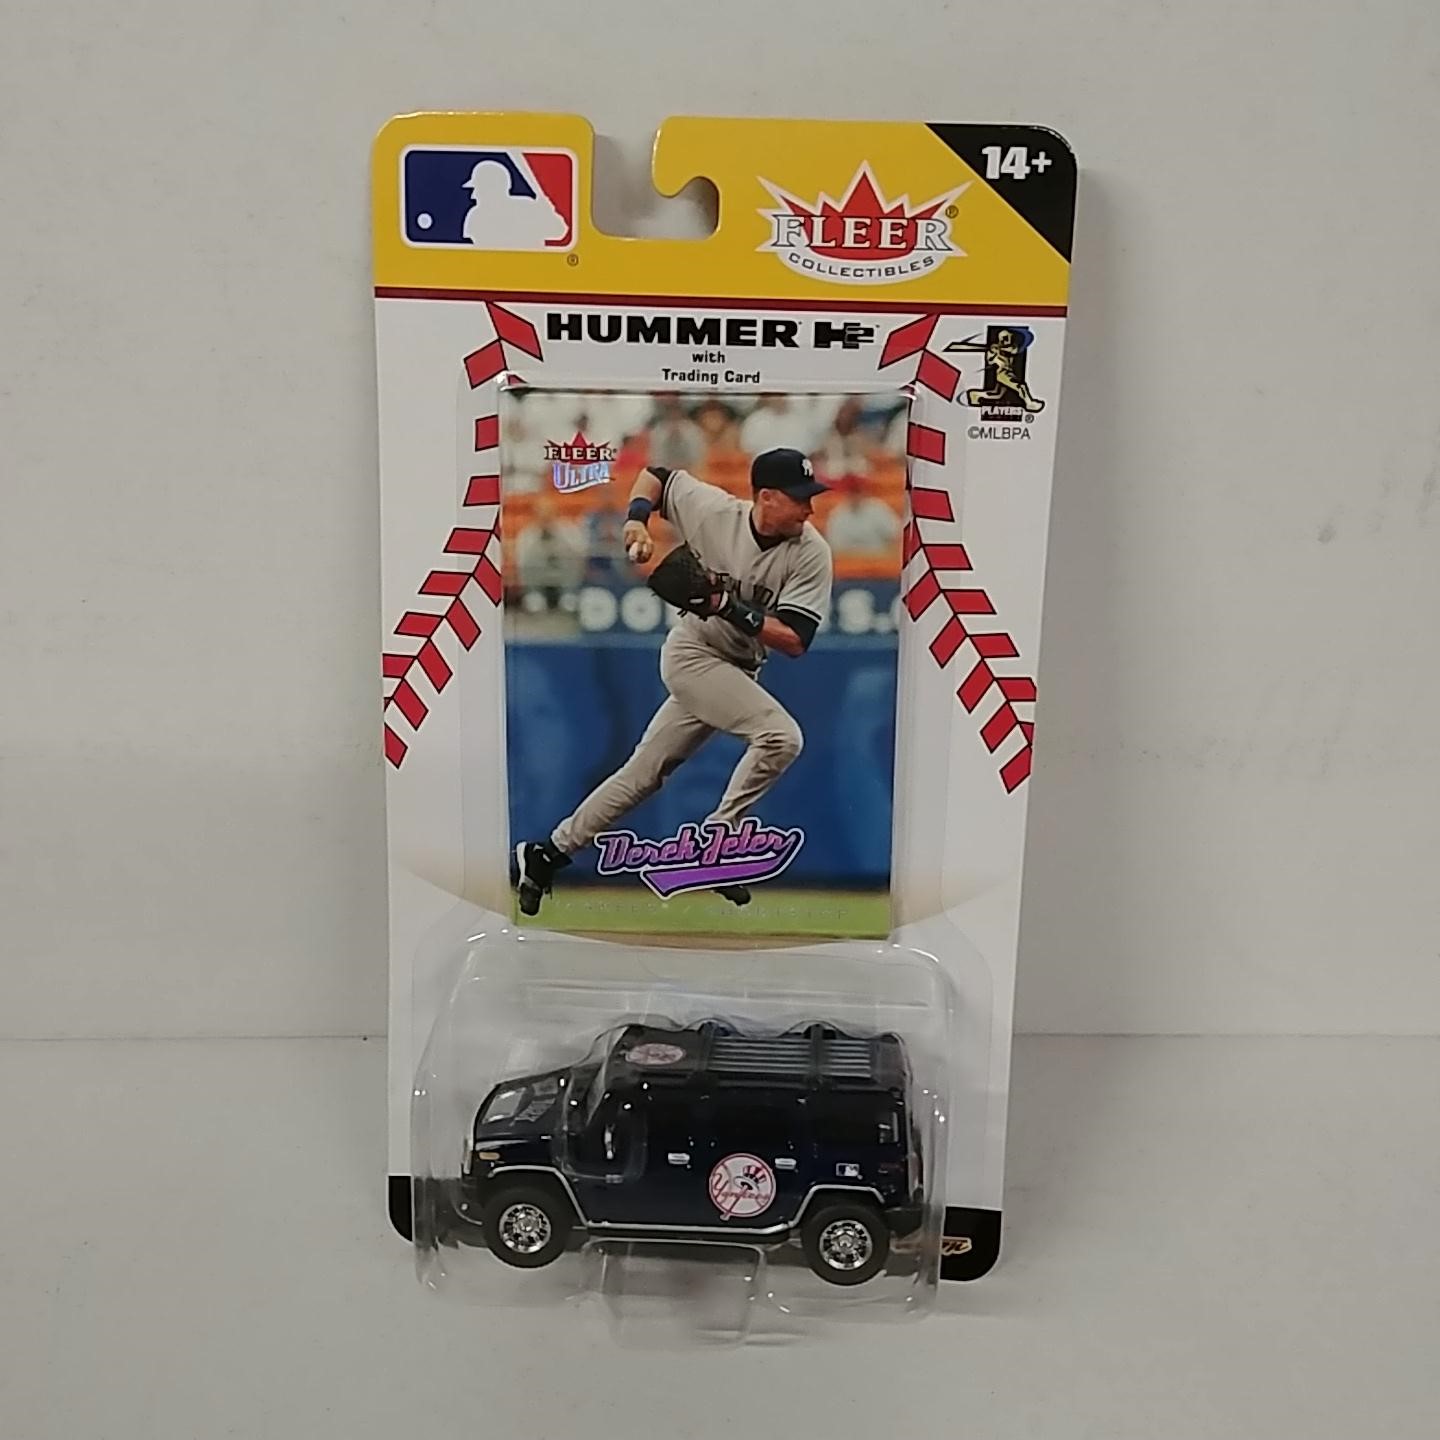 2005 NY Yankees 1/64th Hummer with Derek Jeter with trading card